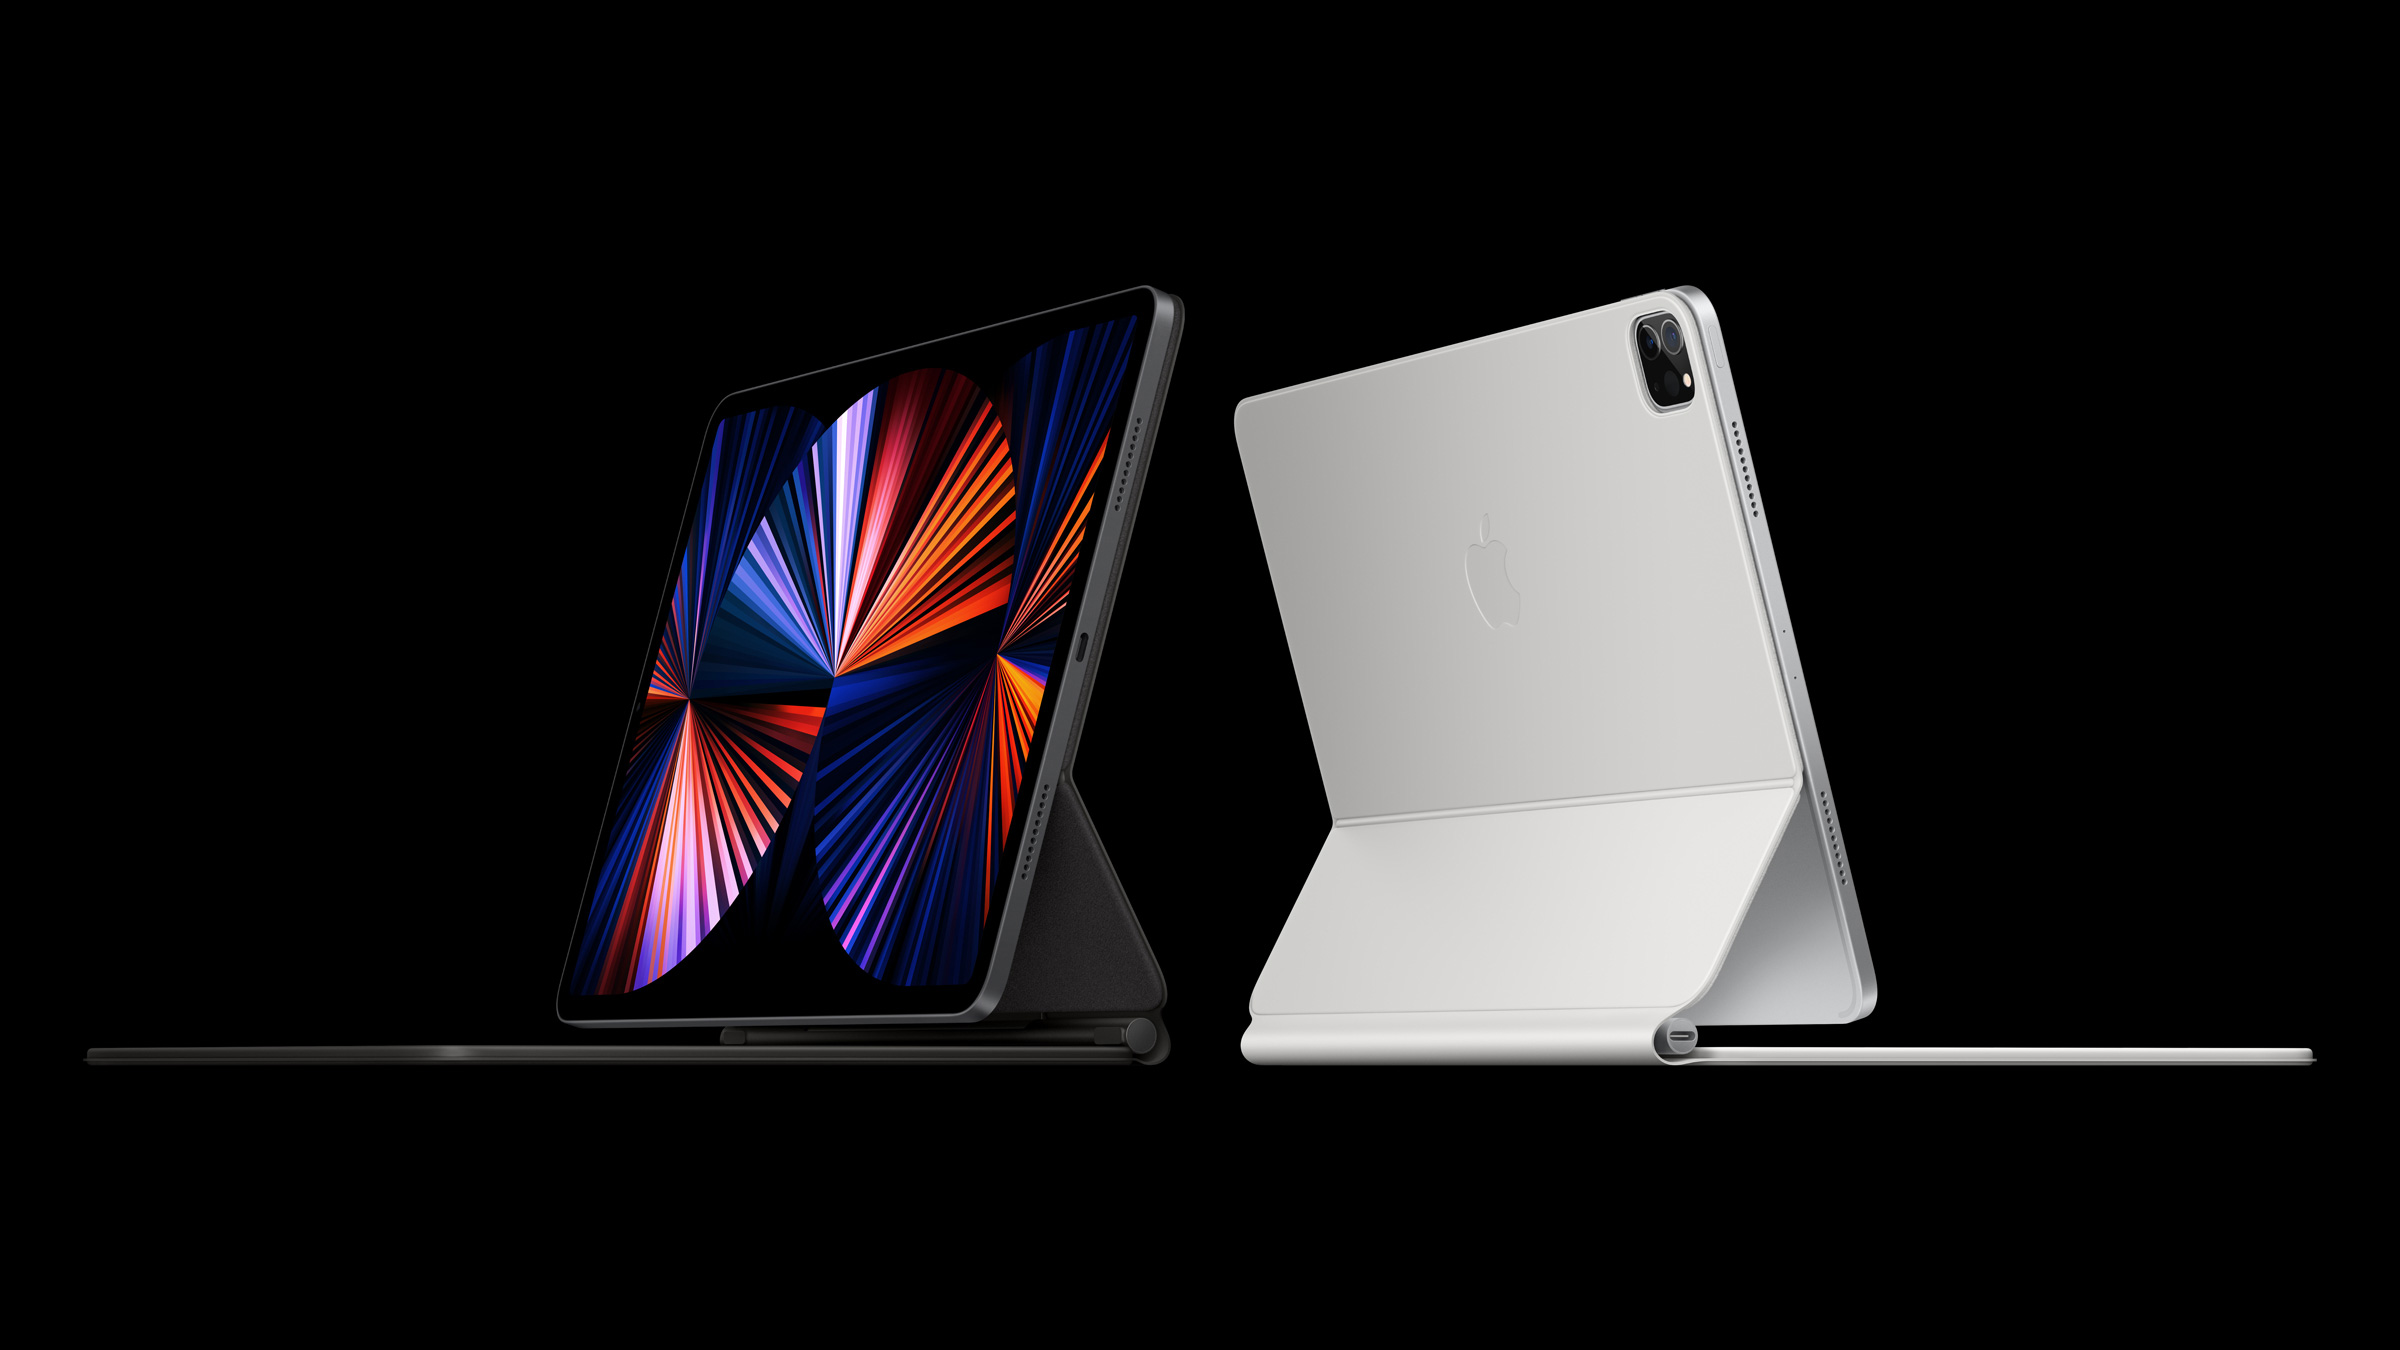 photo of New iPad Pros Announced with the M1 Chipset, Thunderbolt, 5G, New Cameras, and a Liquid Retina XDR Display on the… image